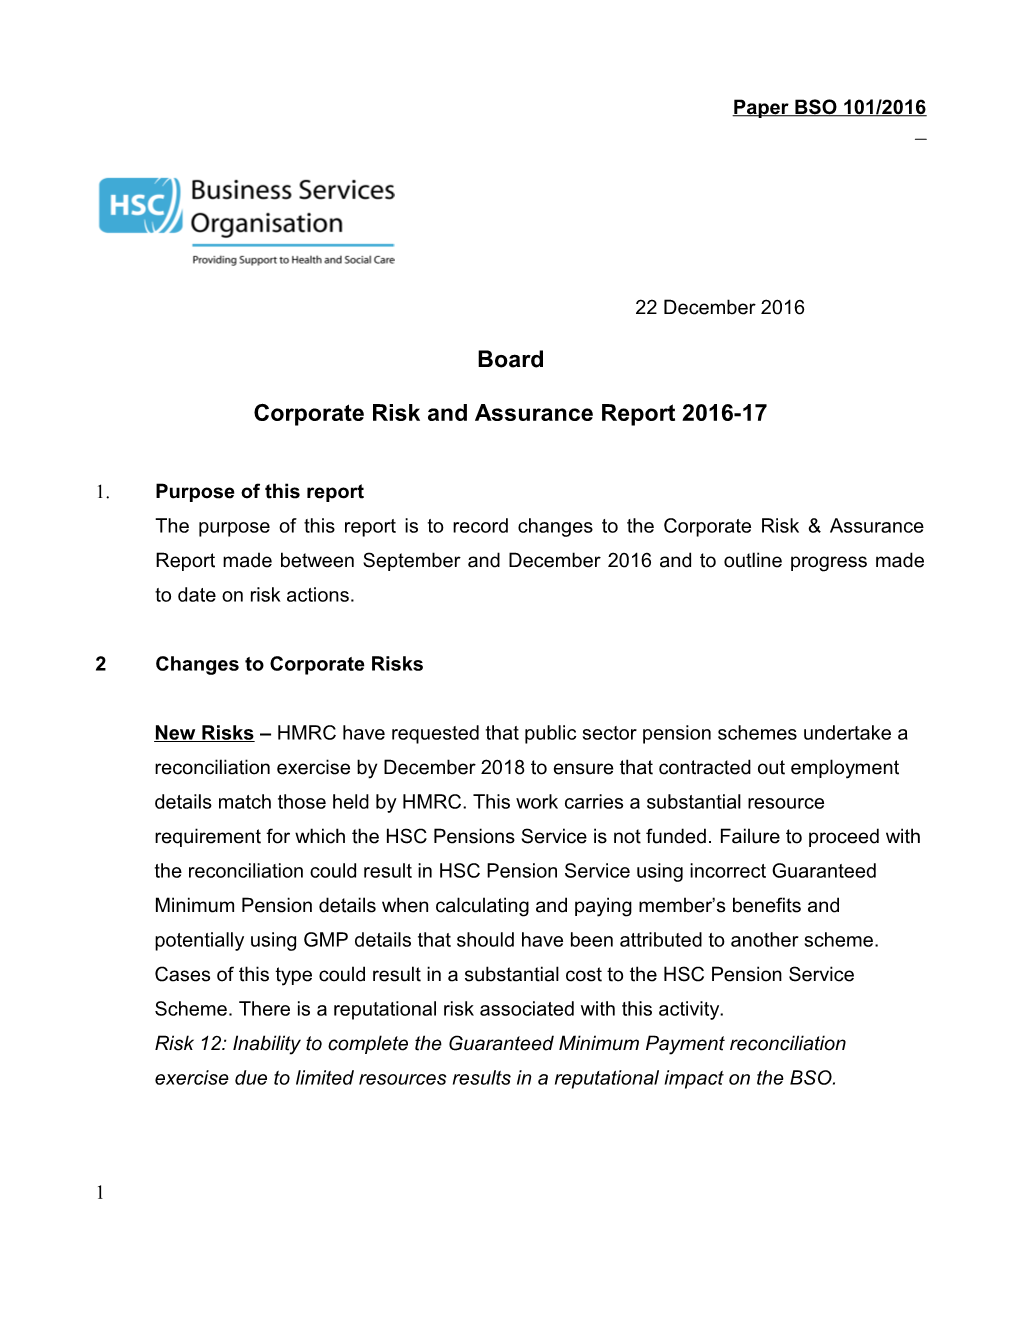 Corporate Risk and Assurance Report 2016-17